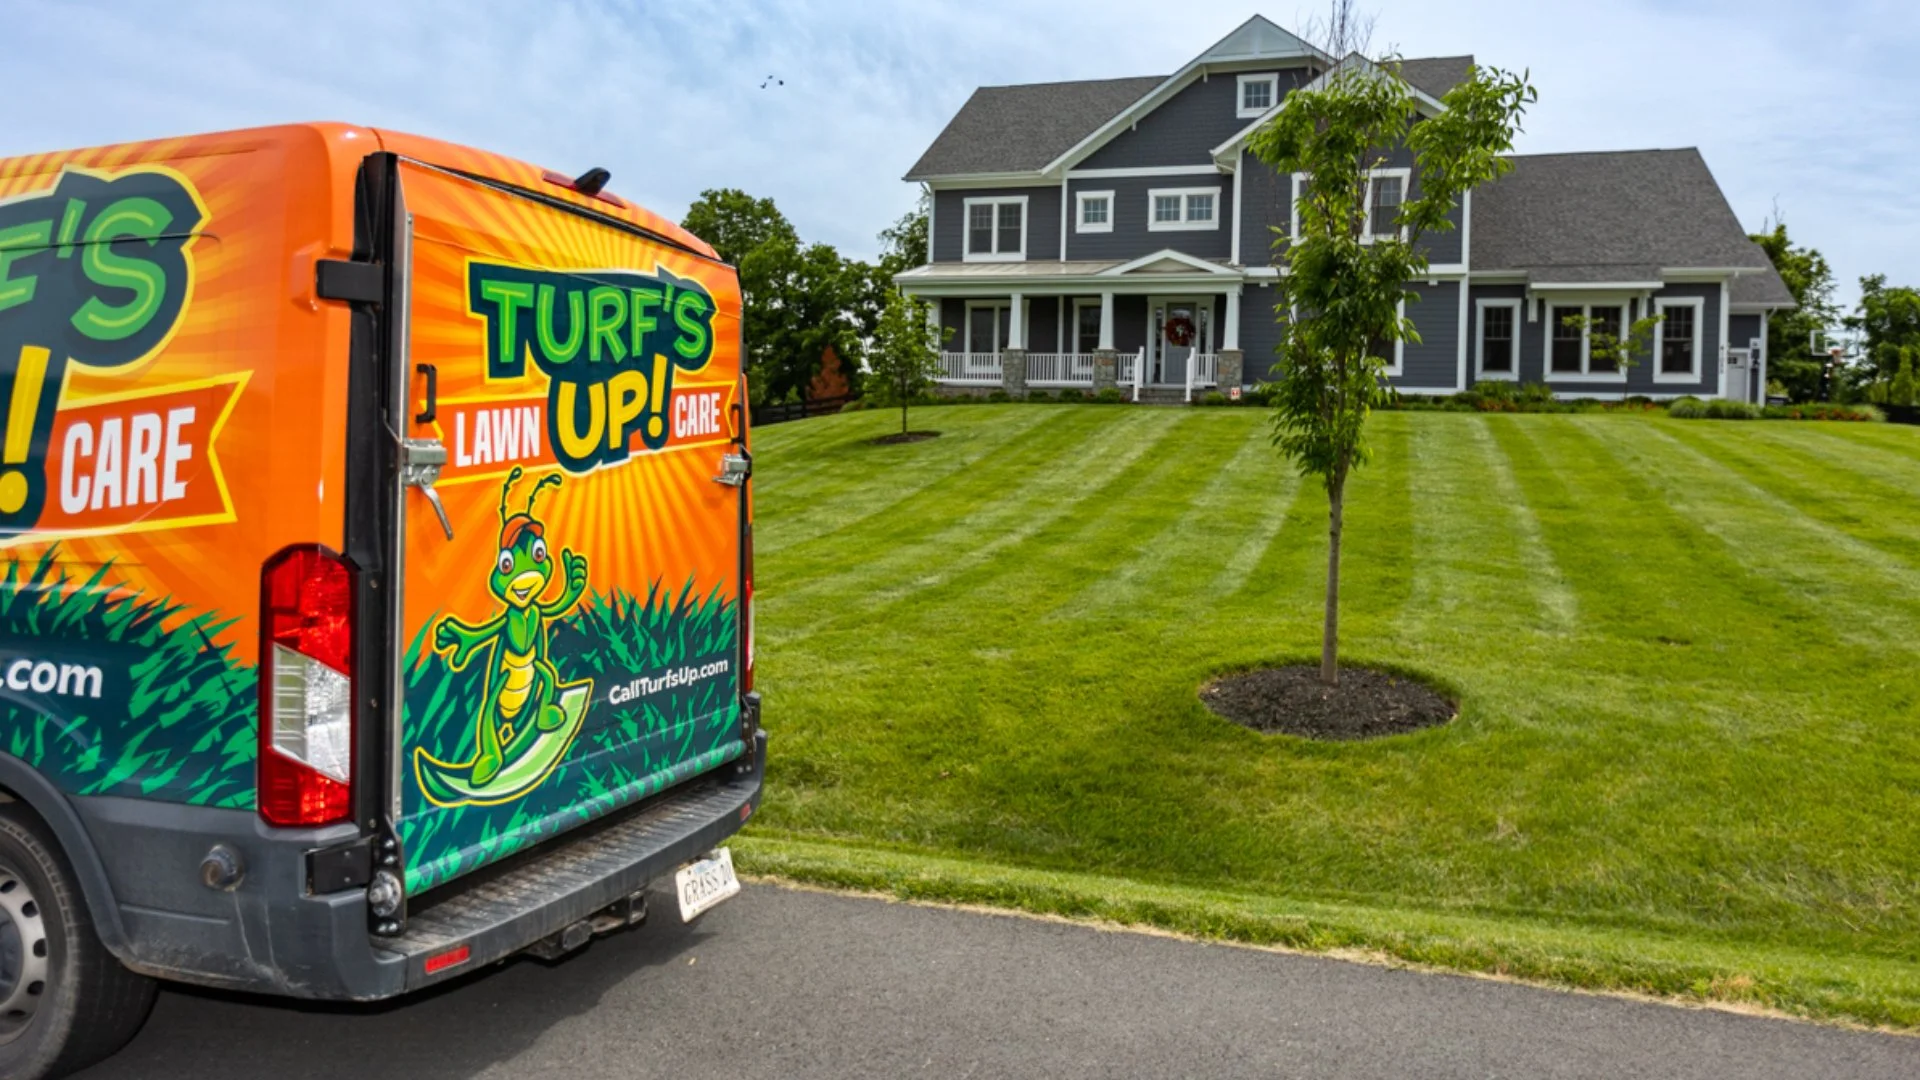 Contact Turf's Up Lawn Care